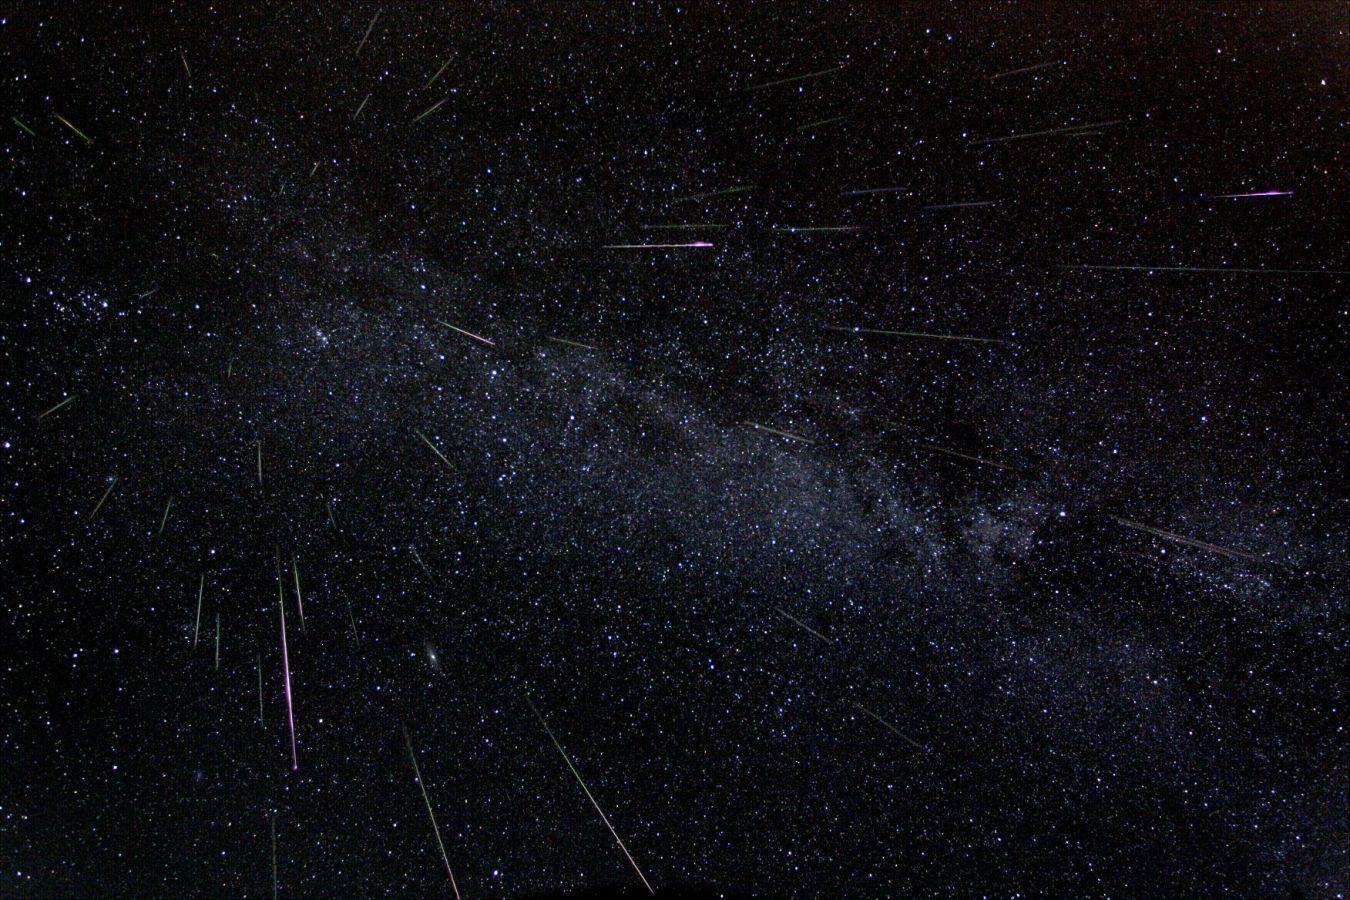 The Most Surprising Facts About the Perseid Meteor Shower